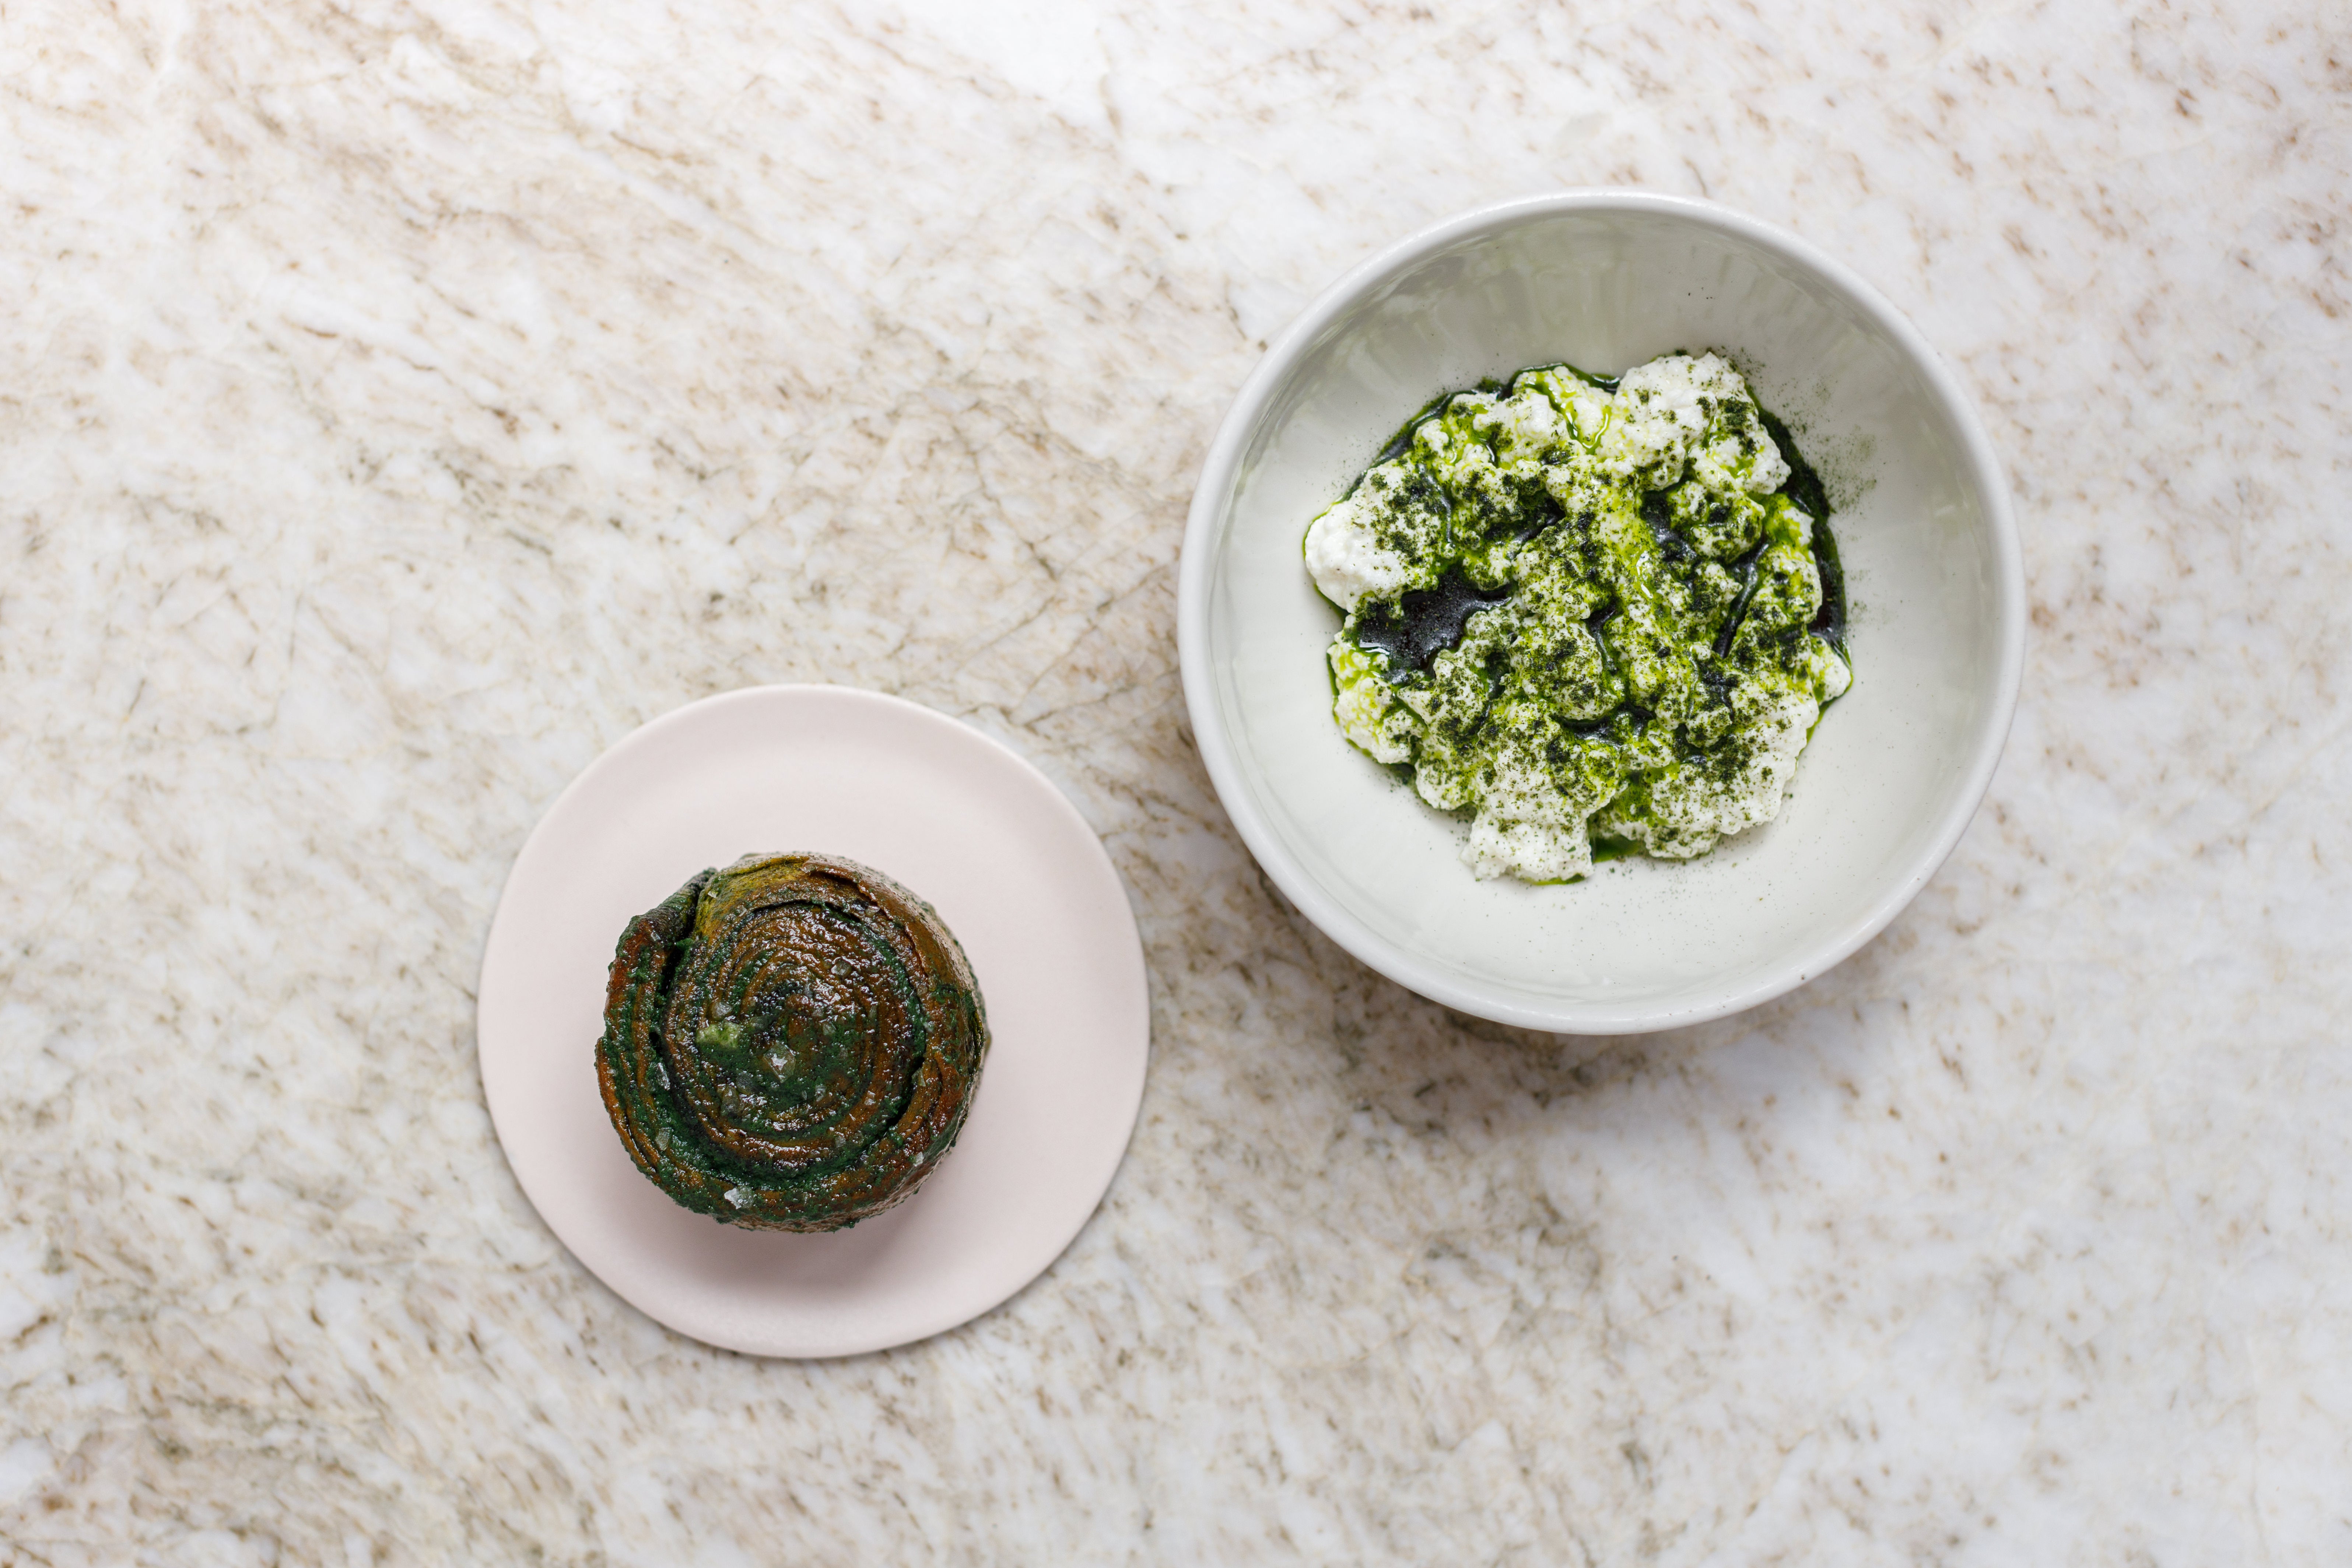 The sheep’s ricotta with a nettle roll is like a meal in itself, but slightly misses the mark